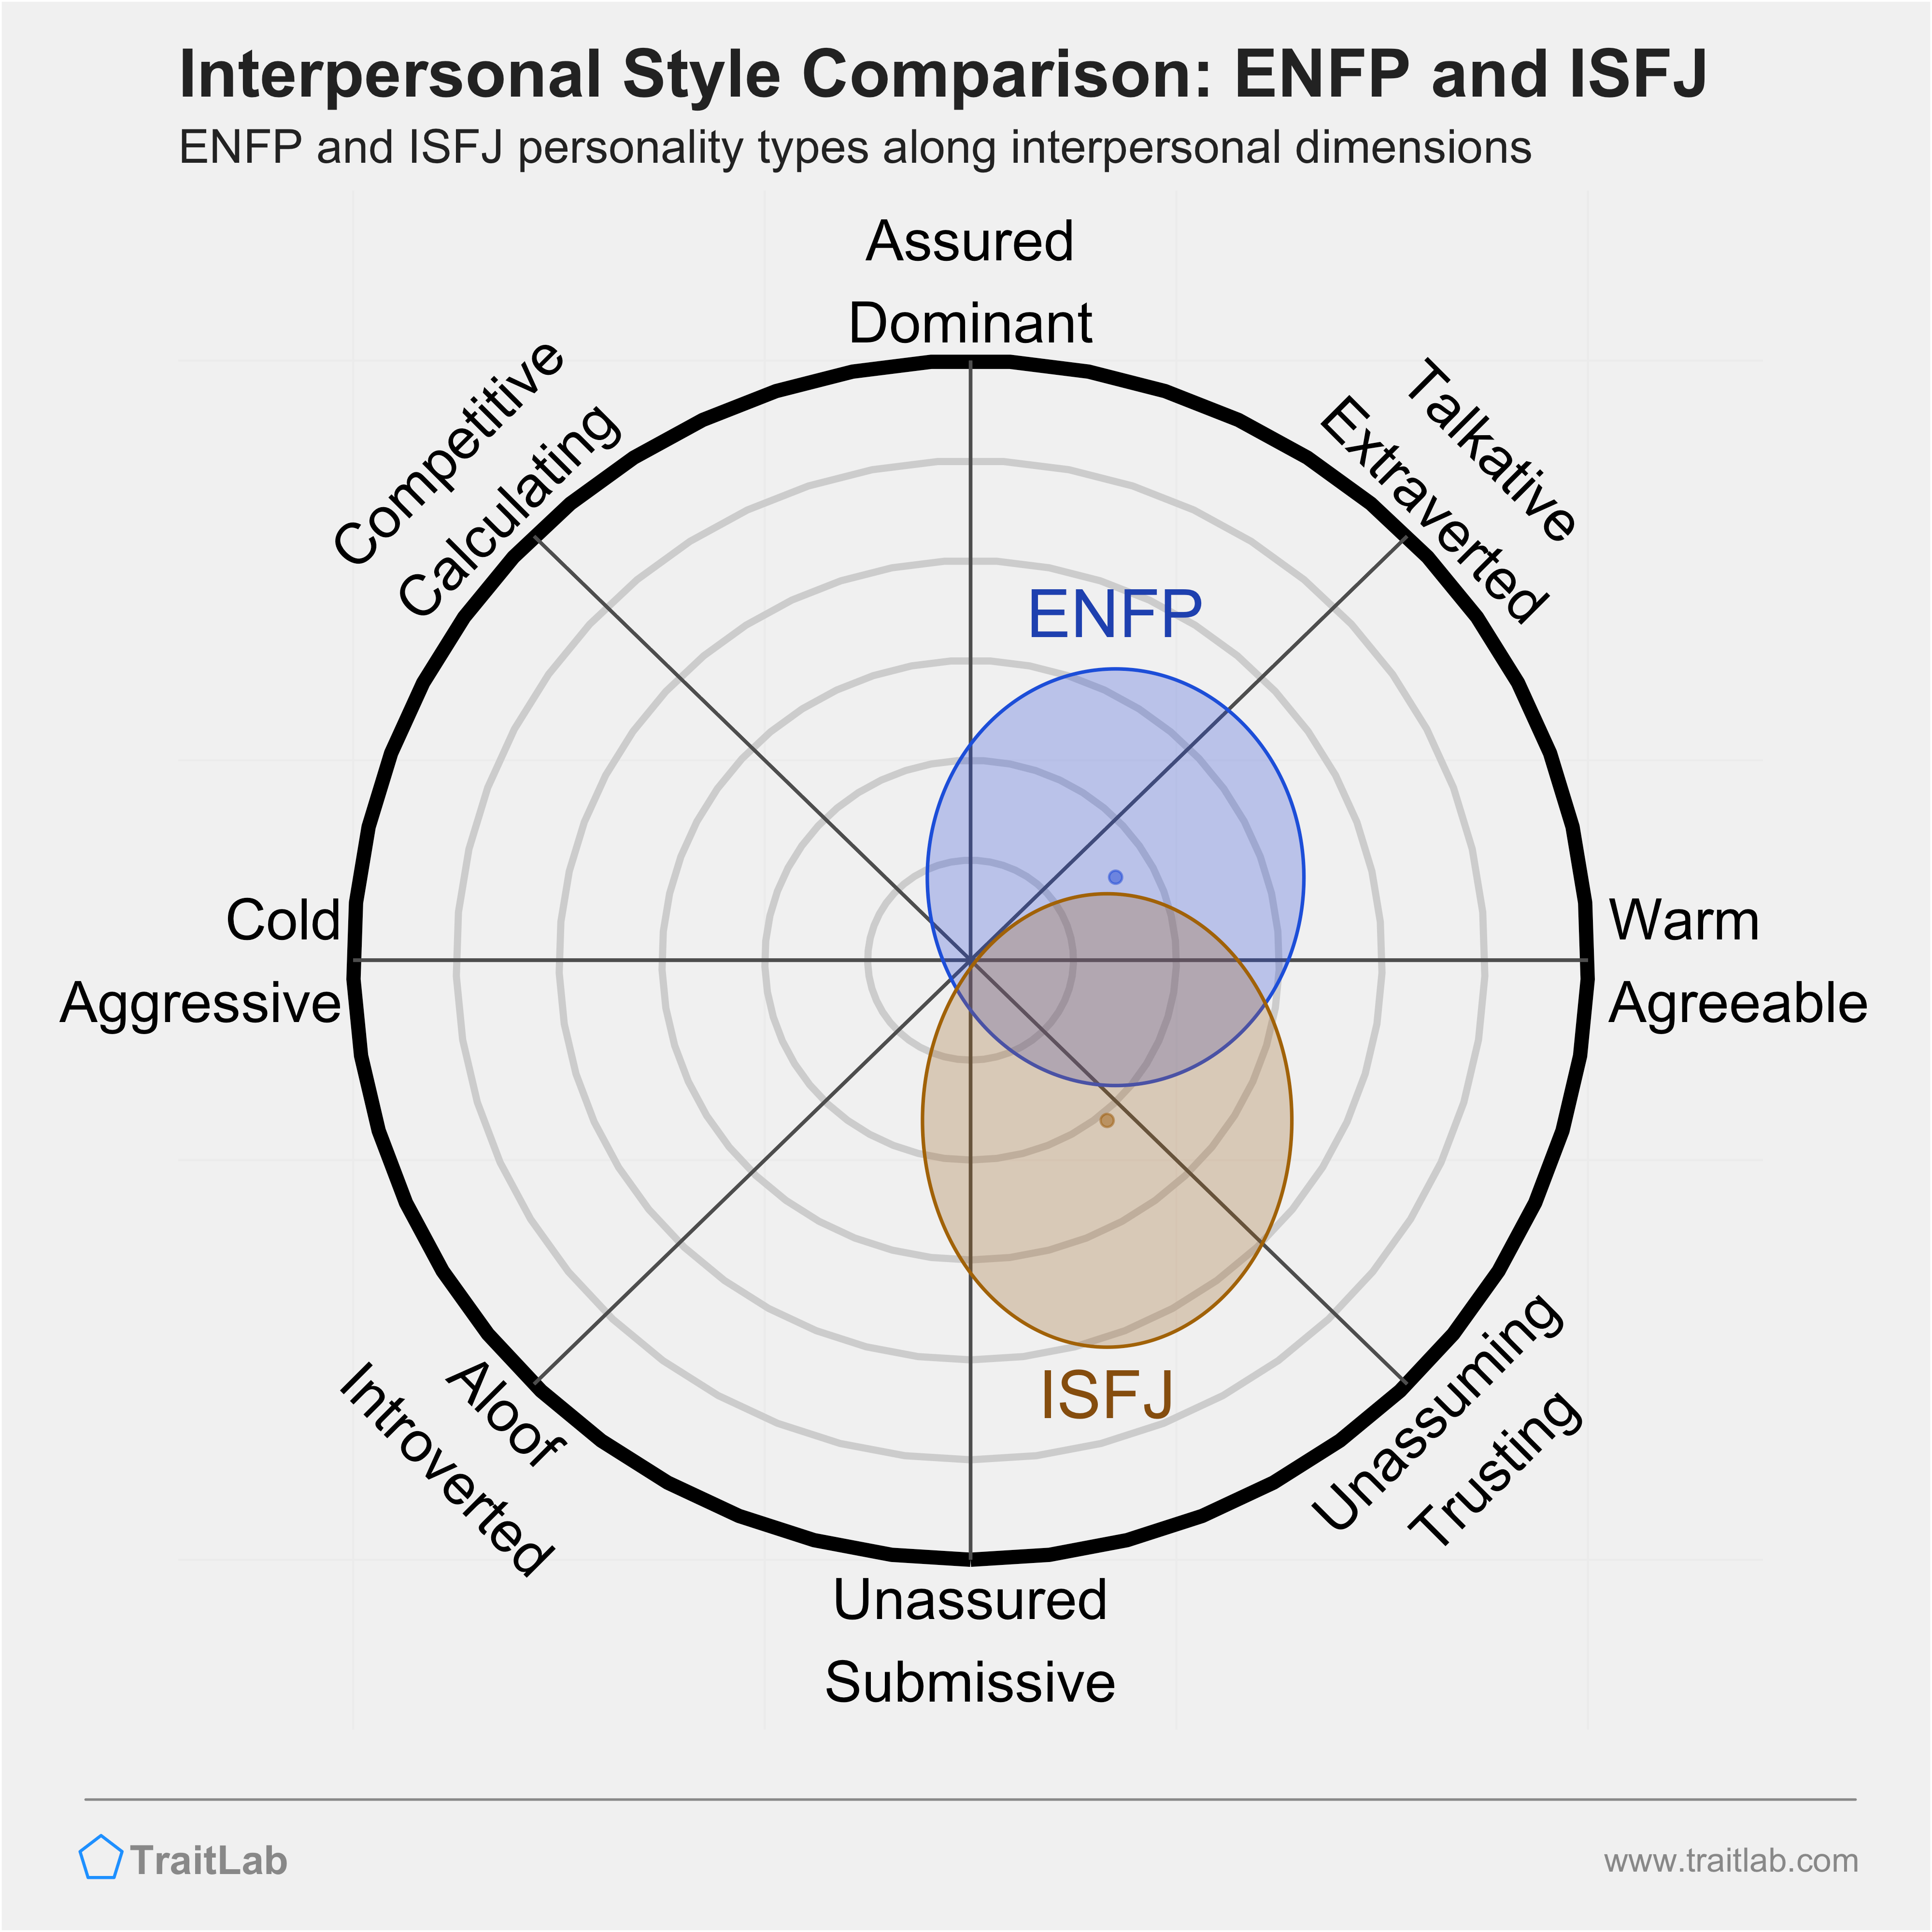 ENFP and ISFJ comparison across interpersonal dimensions